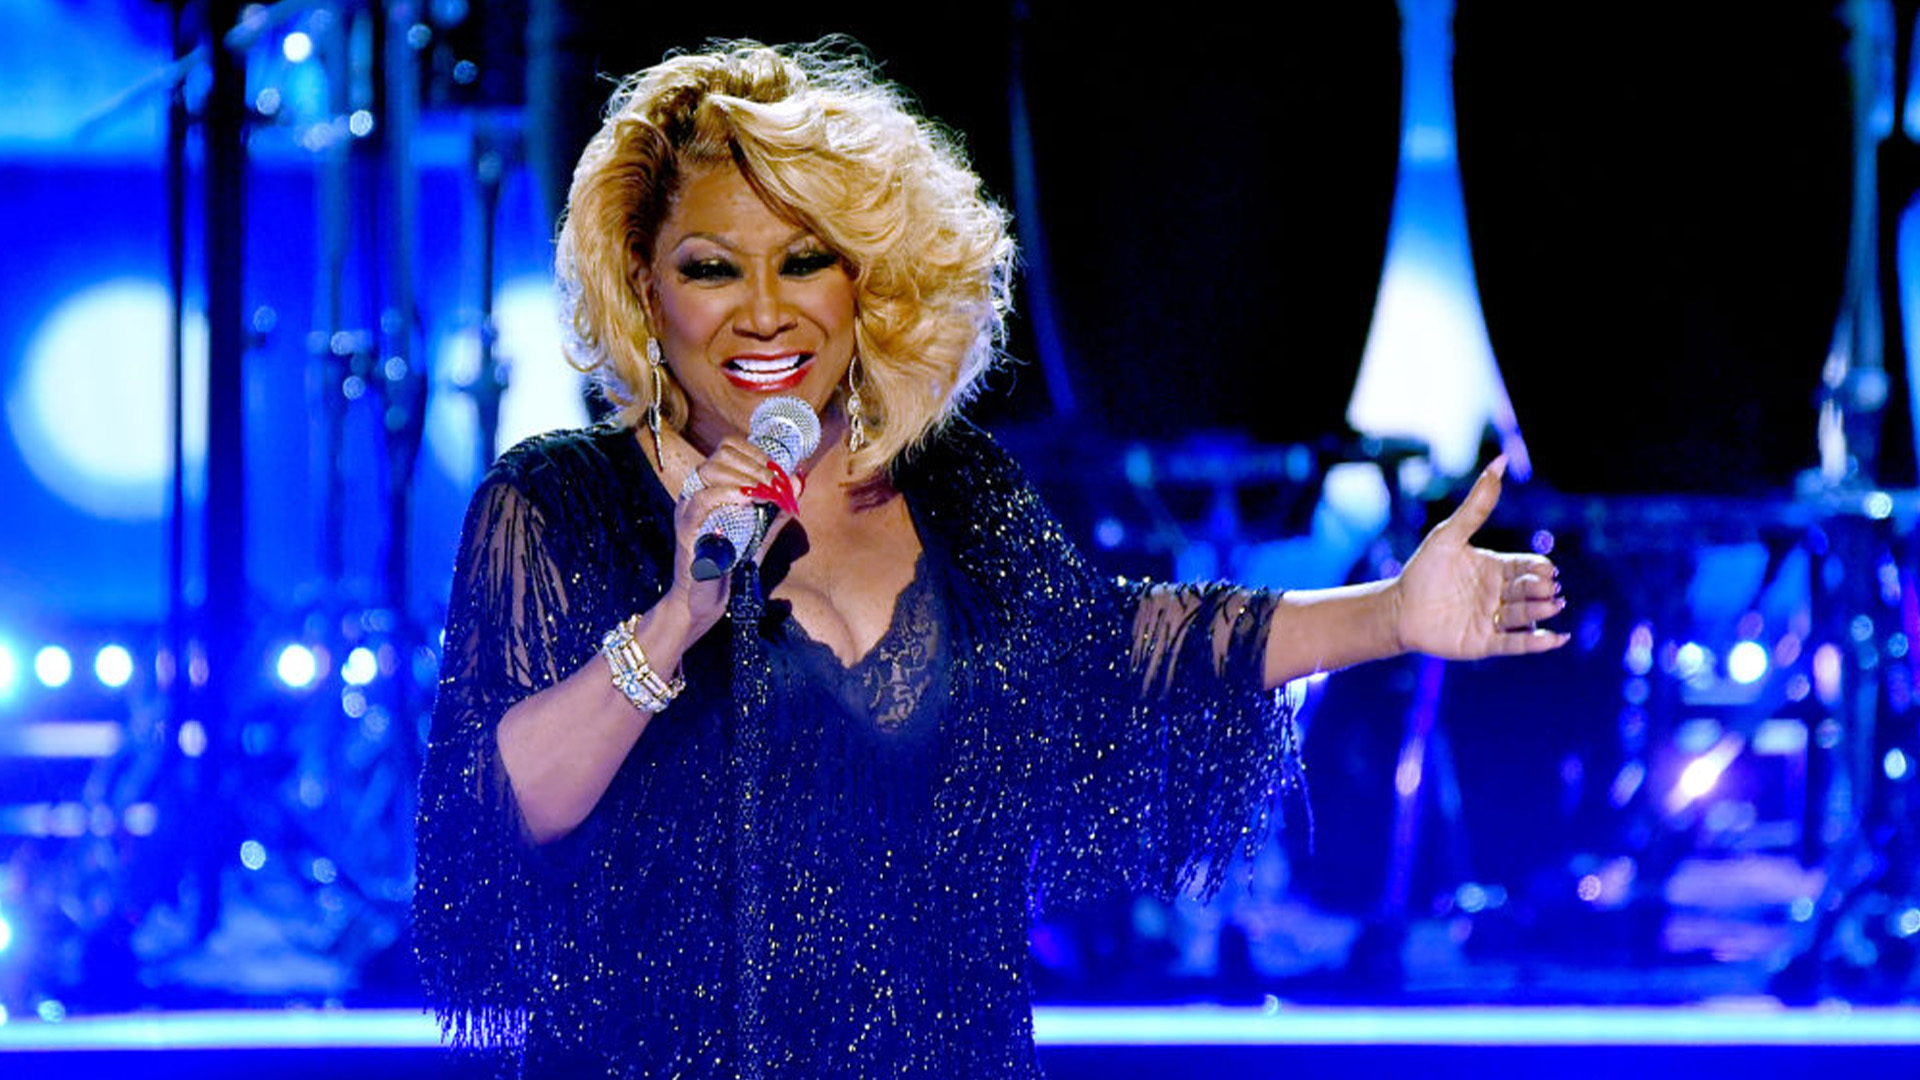 Multi-Hyphenate Patti LaBelle Now Has One Of The Best Selling Brands At Walmart